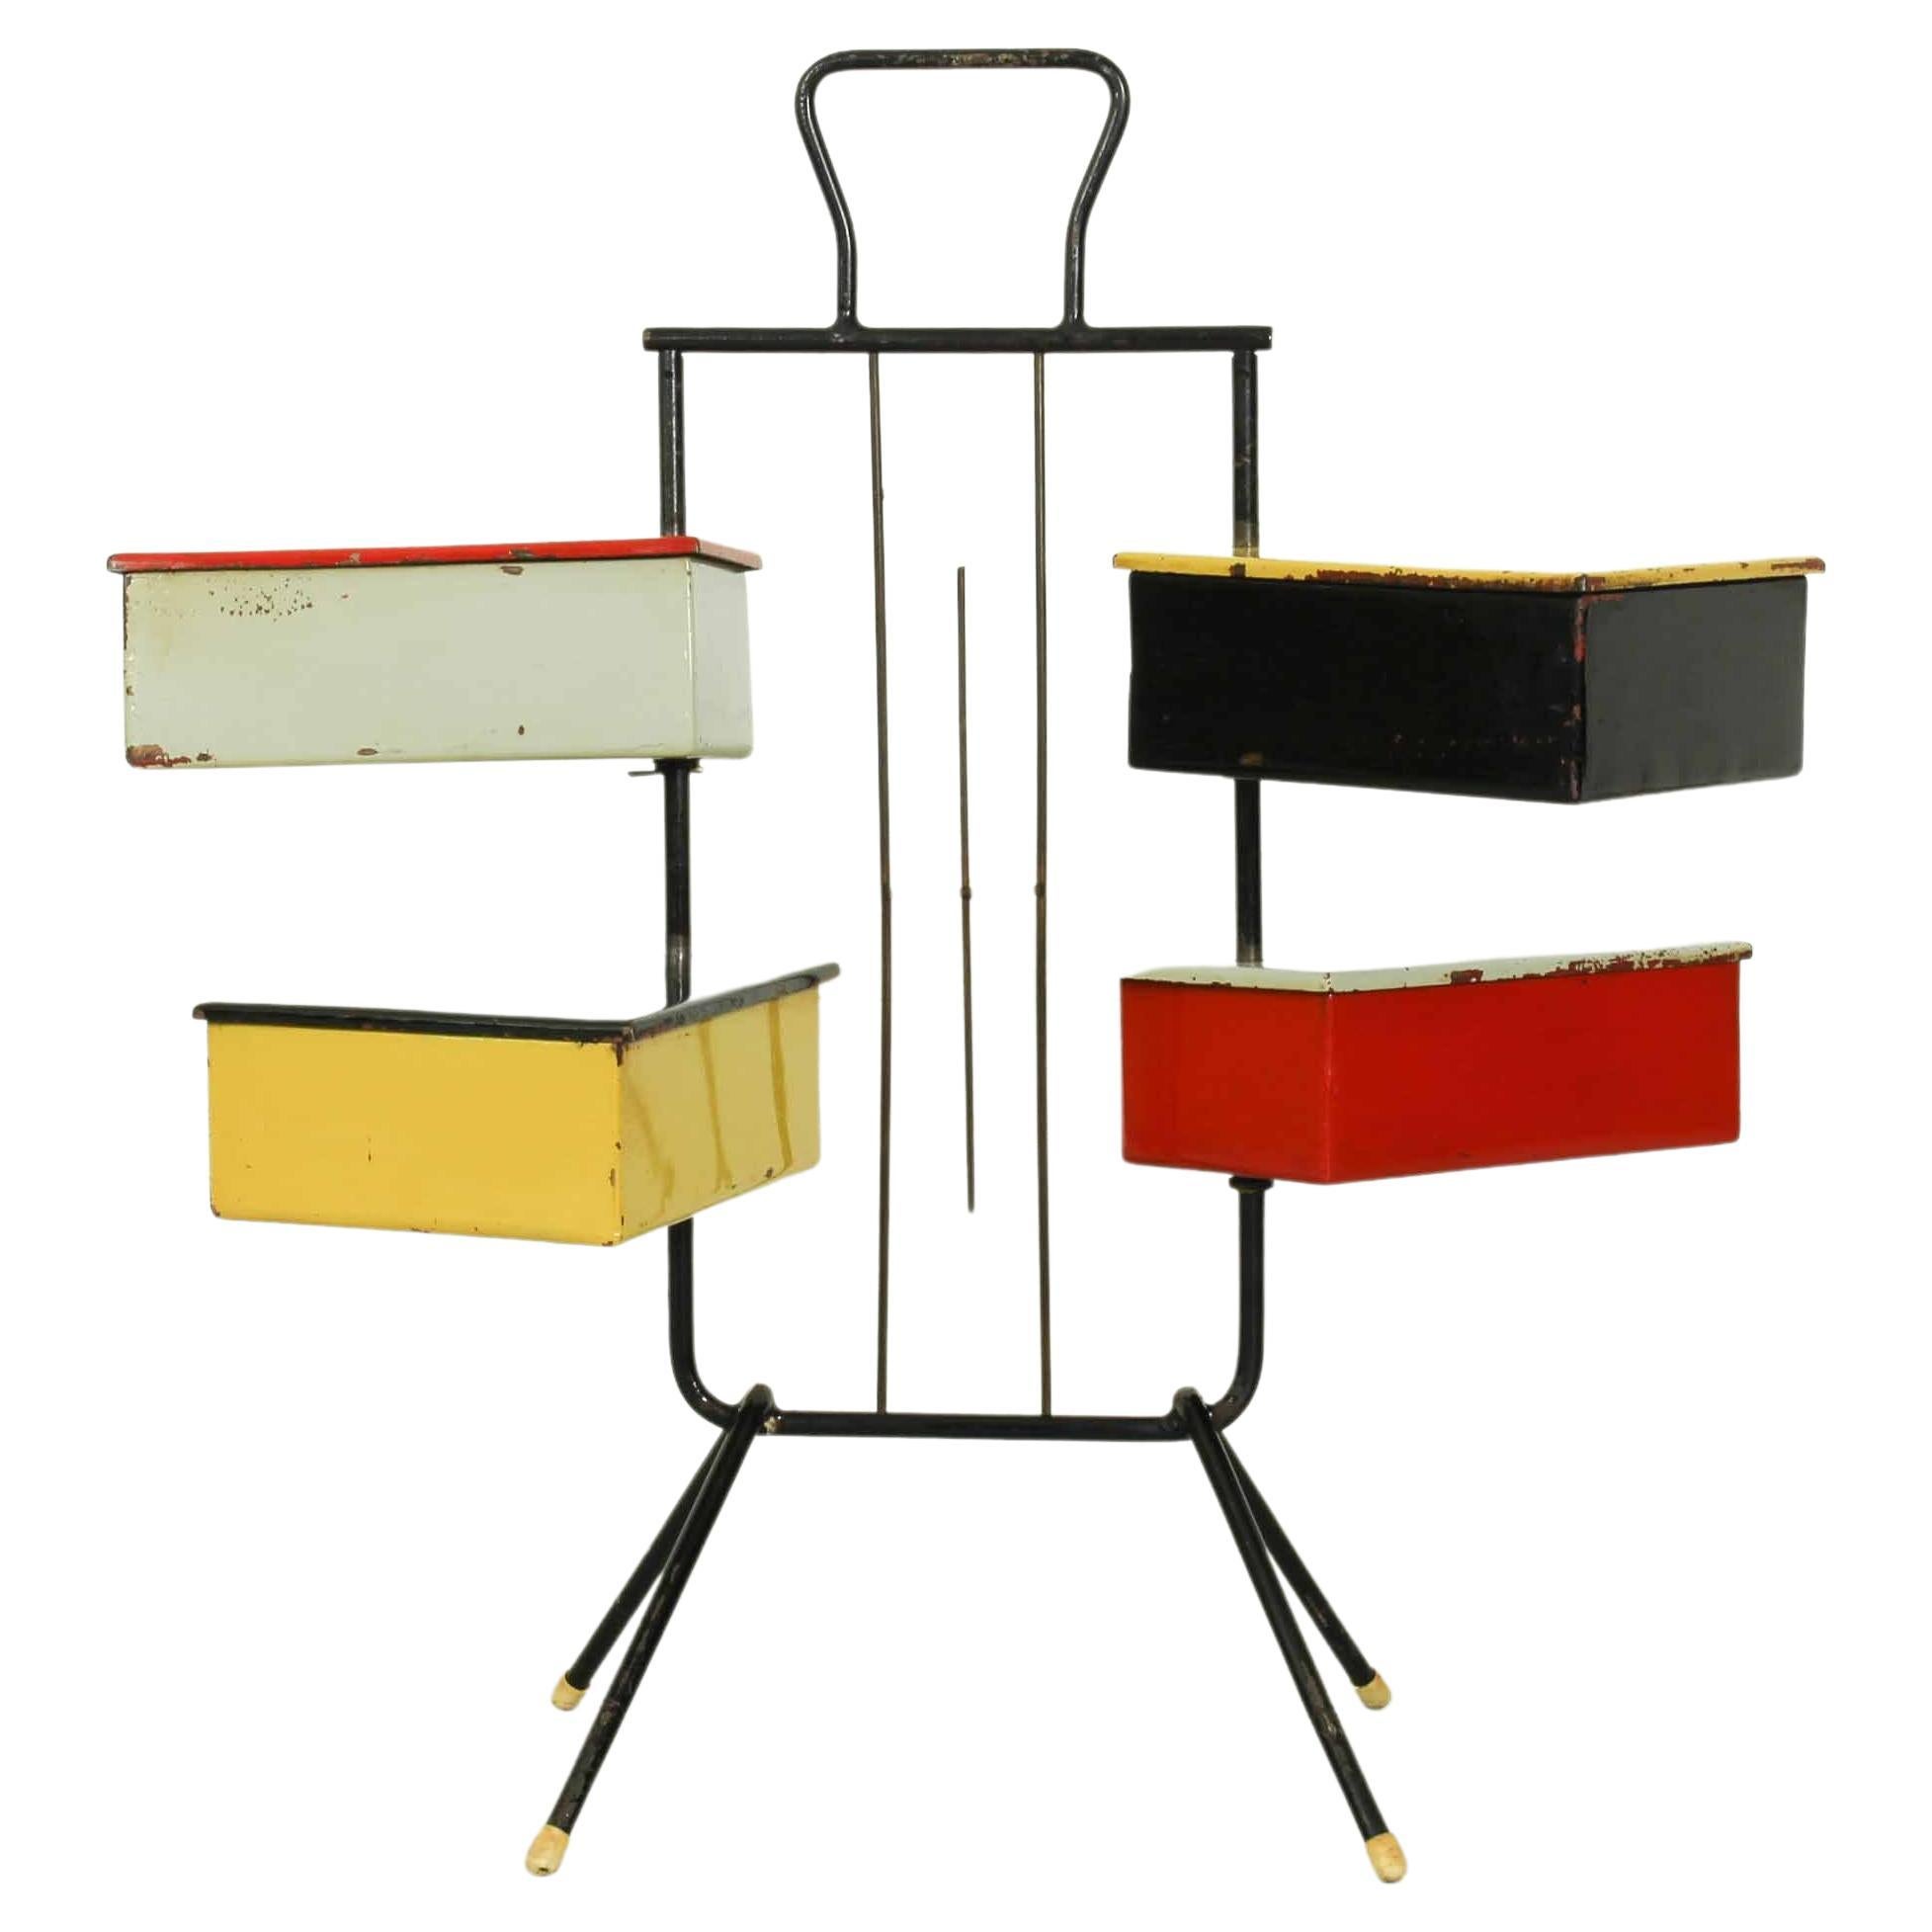 This 1950s sewing stand with 4 boxes was designed by Joos Teders for Metalux. It has four colored metal boxes (that can swivel arount the metal Stand) which gives a Rietveld style to this item. This item has traces of use consistent with age.